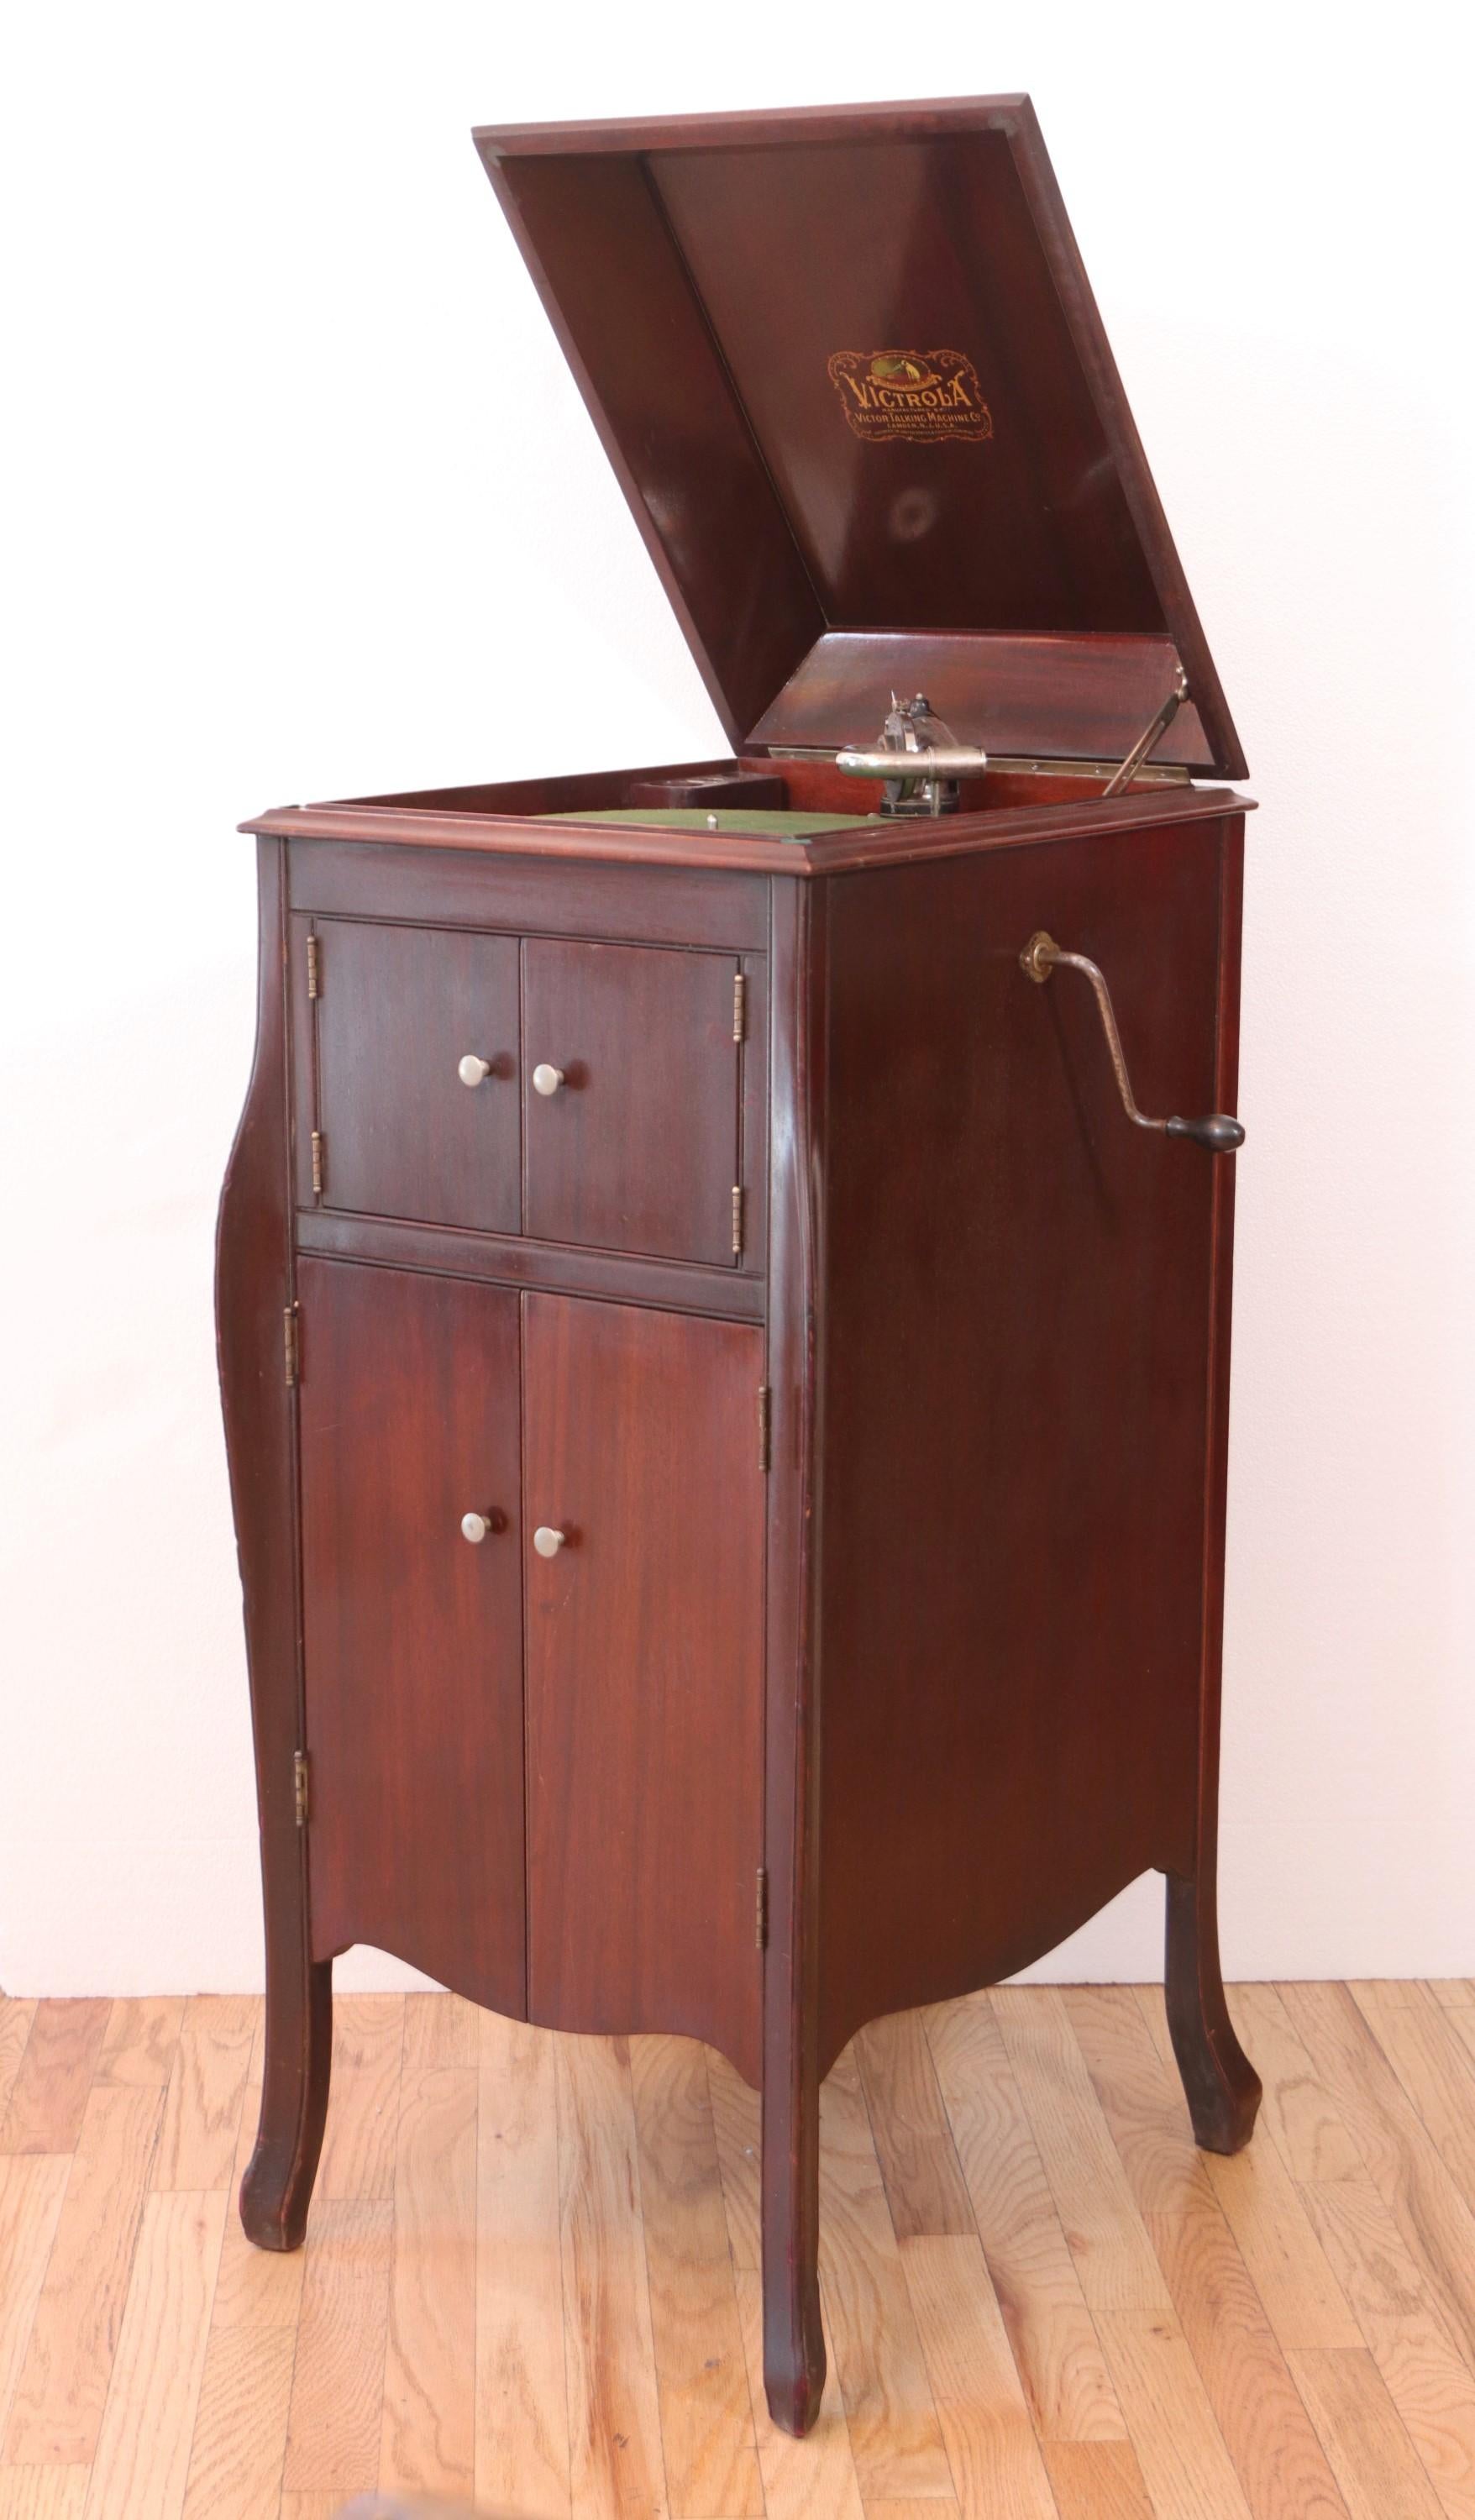 Victrola VV-X Floor-Model Phonograph by The Victrola Talking Machine Co. For Sale 2